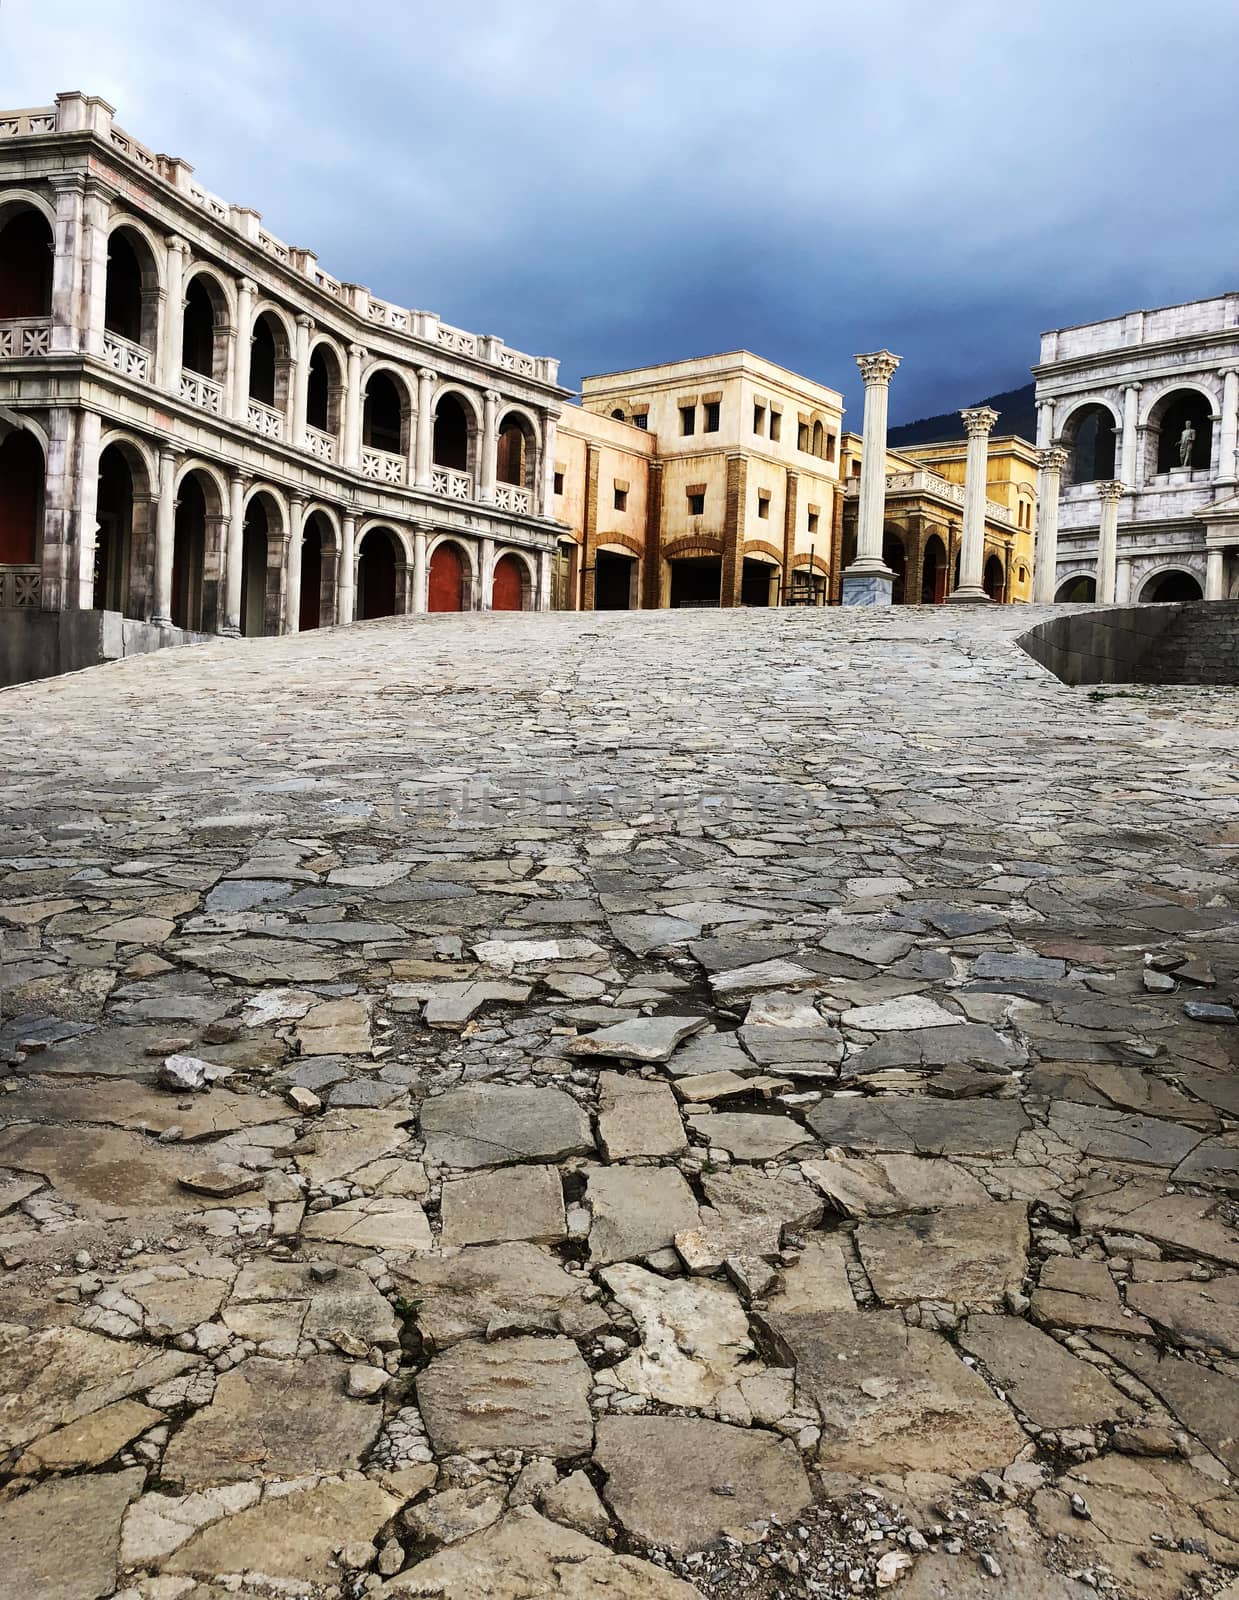 roman style buildings perspective path way by F1b0nacci